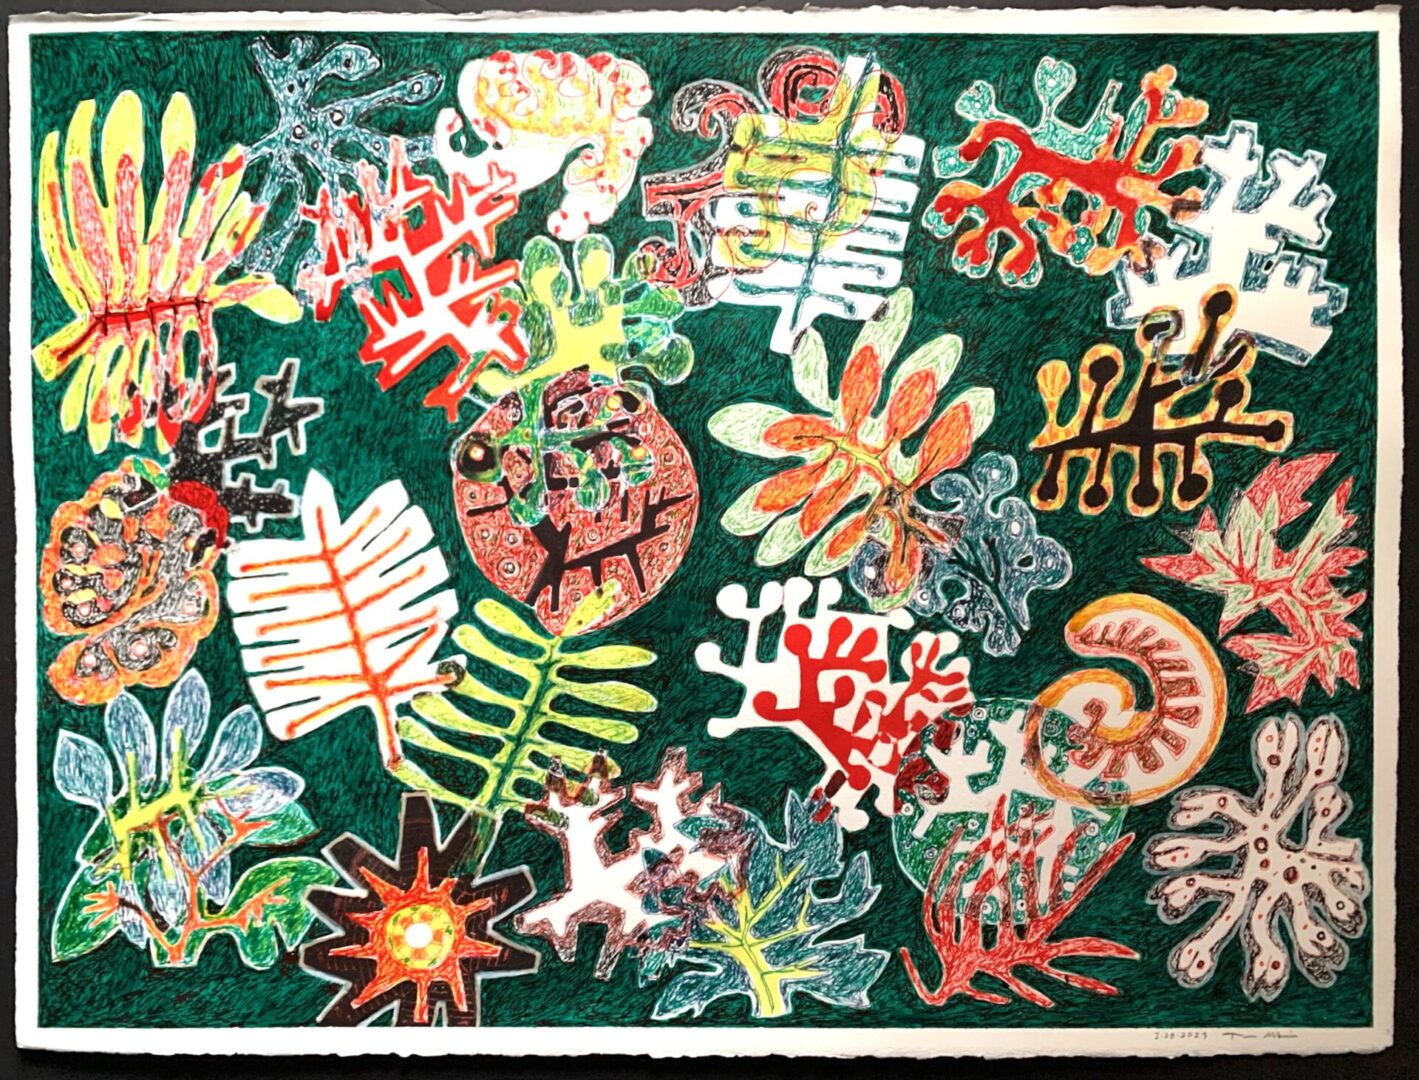 A painting of various plants and leaves on a green background.